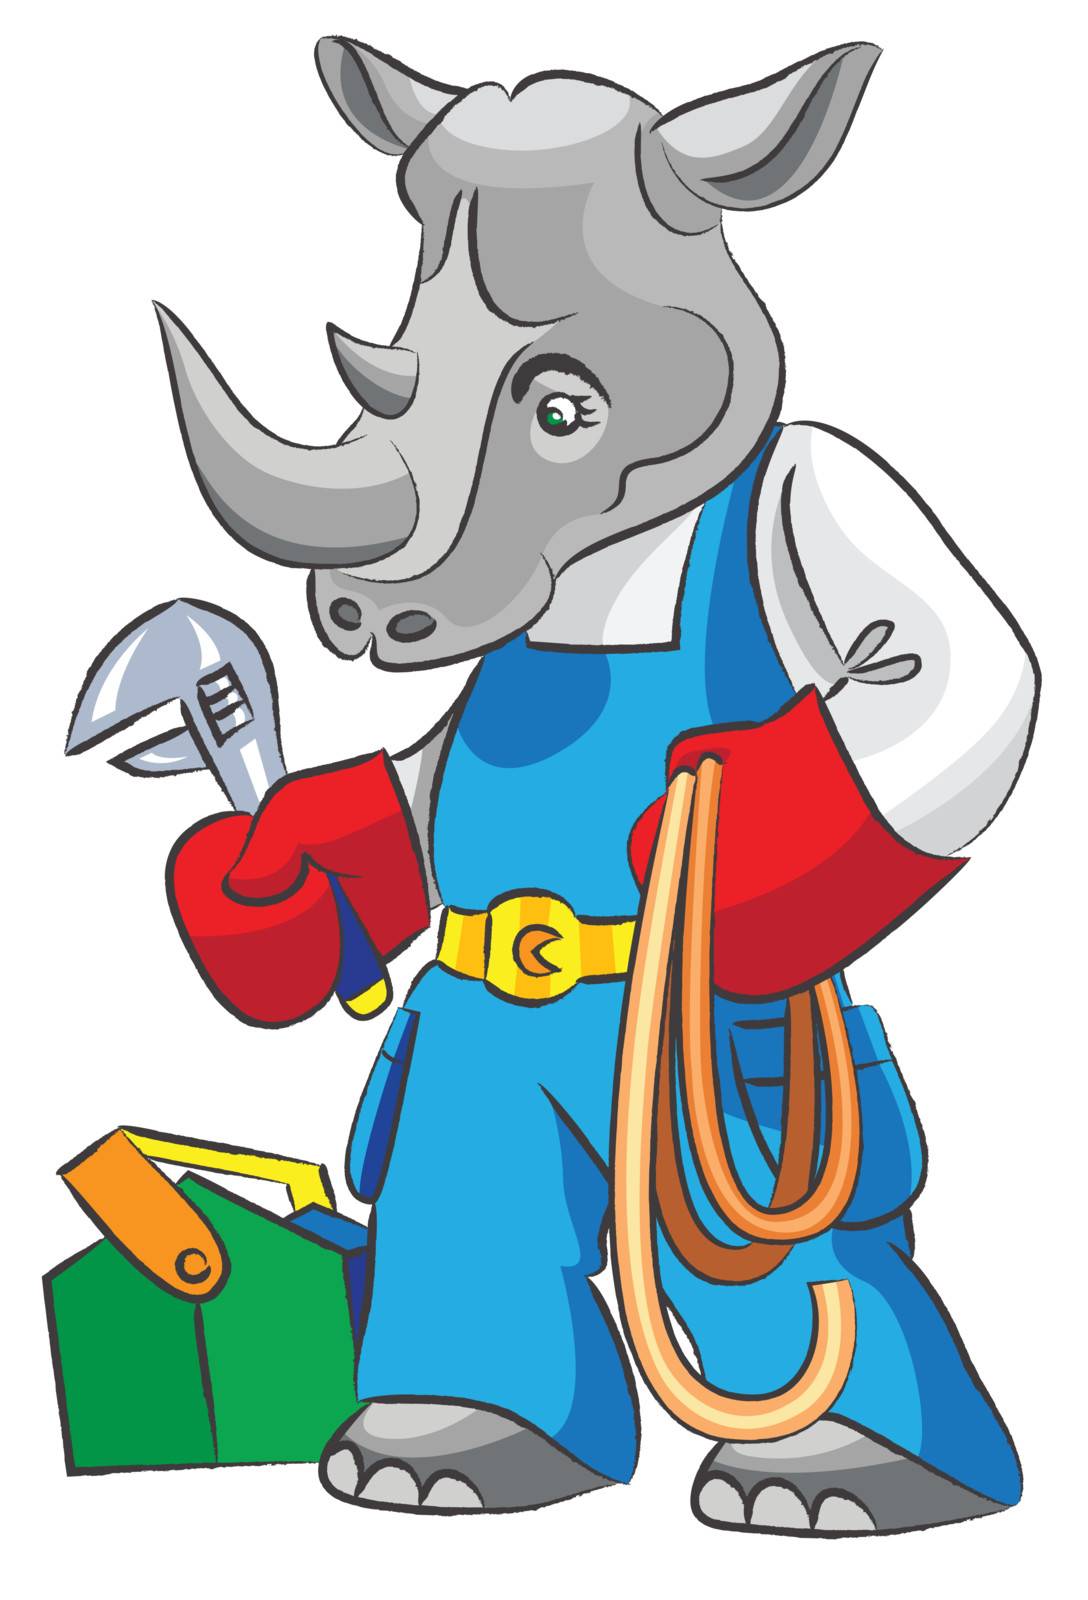 Cartoon rhinoceros is the plumber with 
an adjustable spanner and a hose, all layers separately, it is easy to change color and the size, gradients and transparency are not present